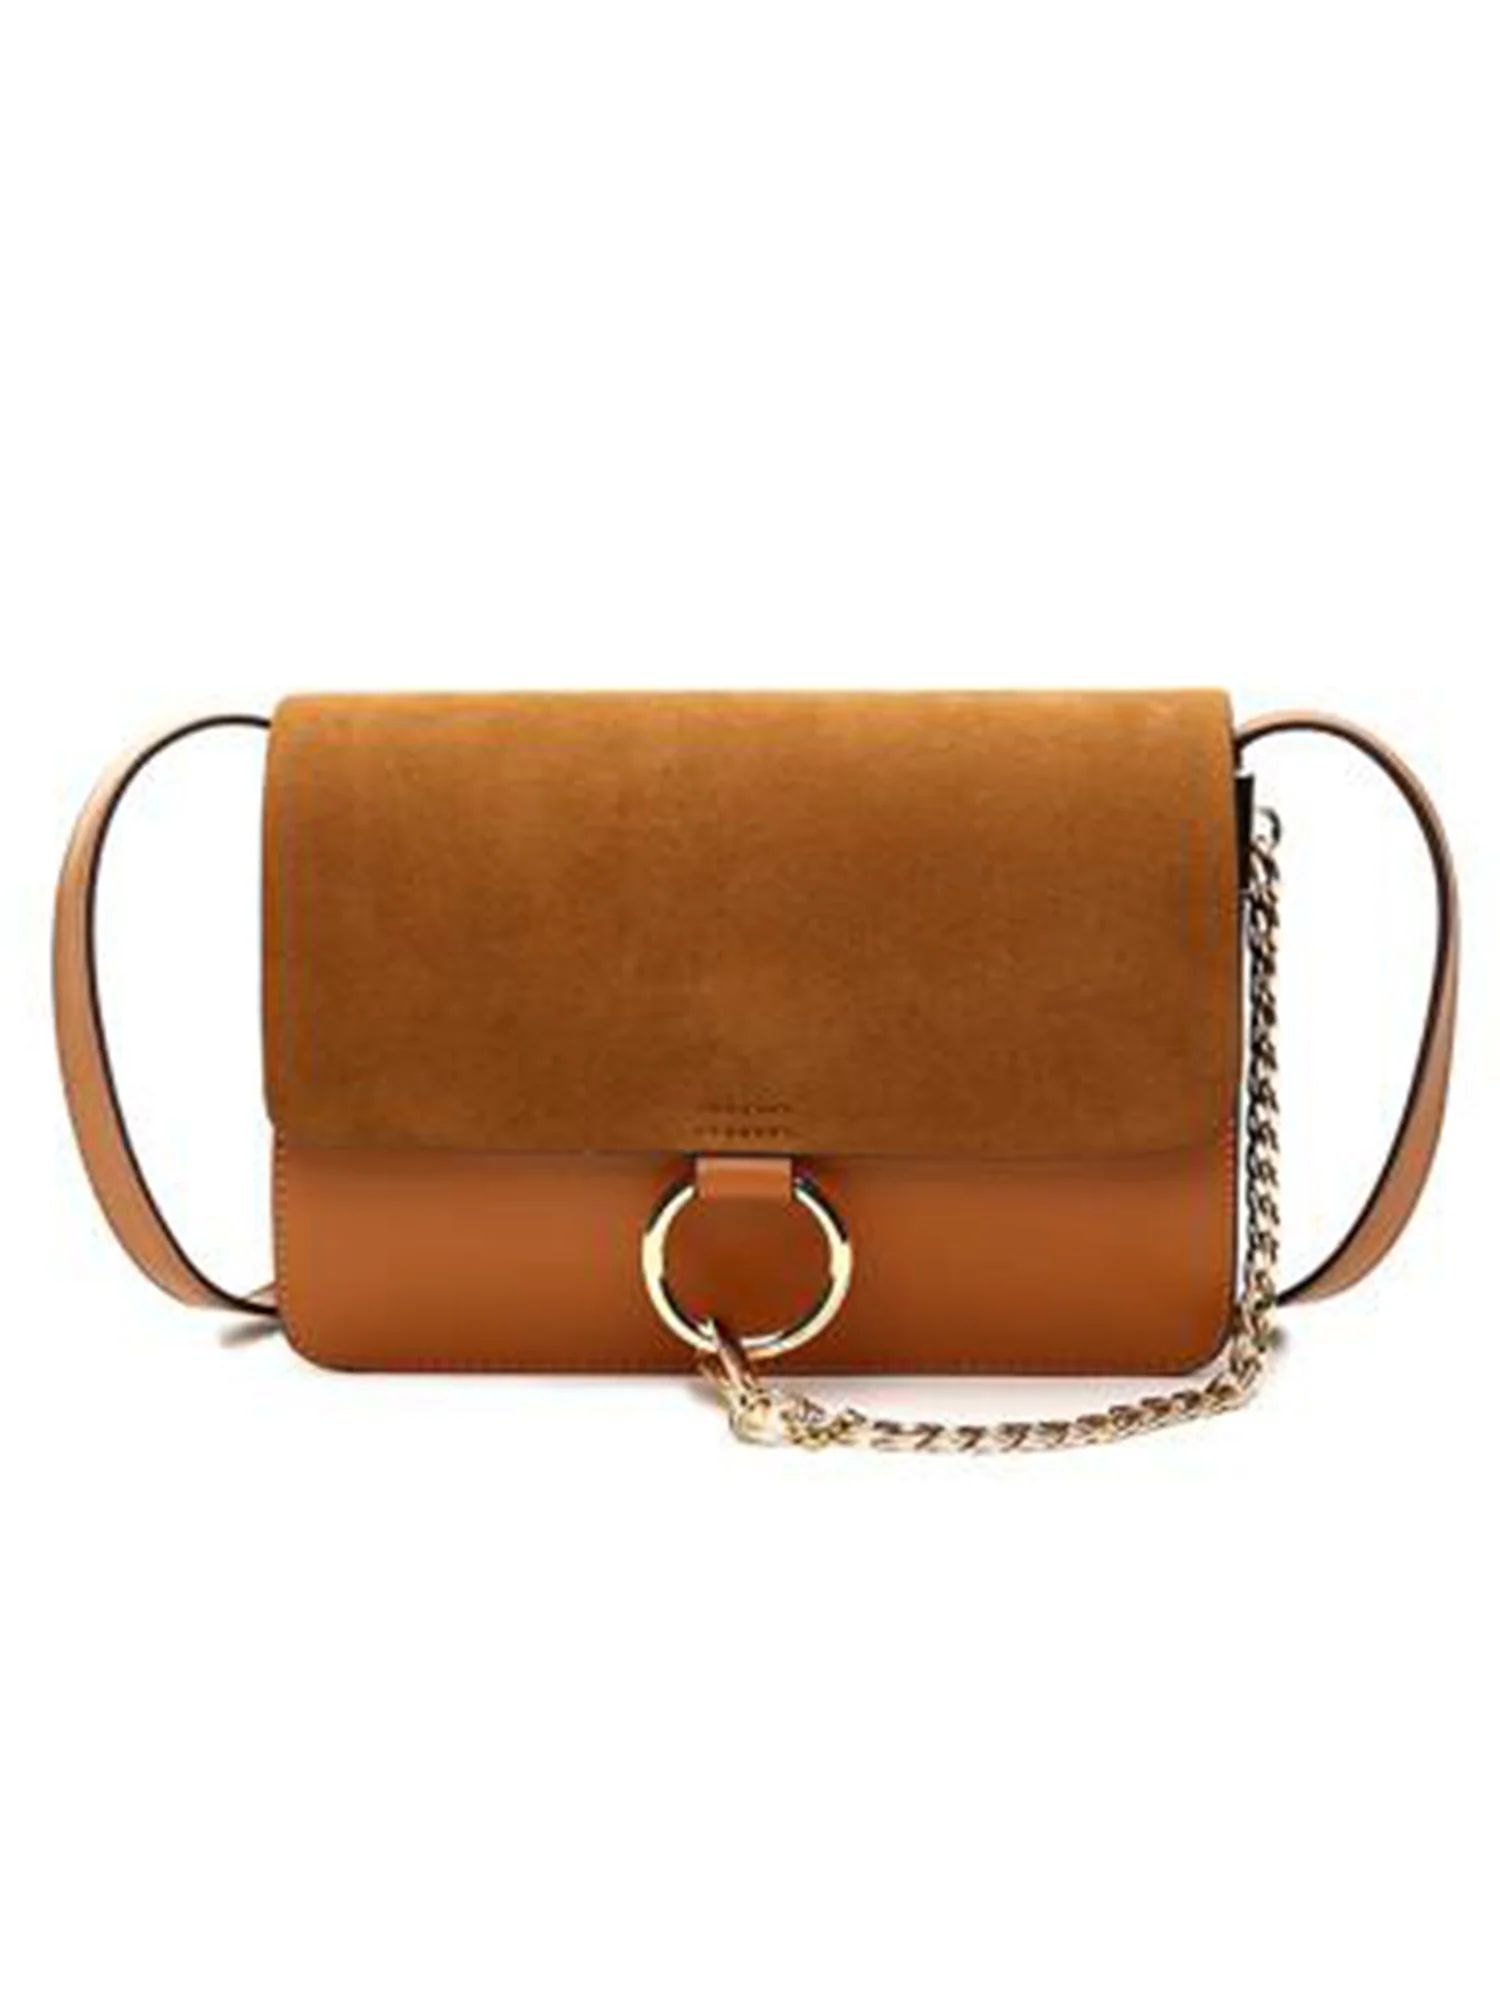 'Anja' Faux Suede Leather Cross Body Bag | Goodnight Macaroon